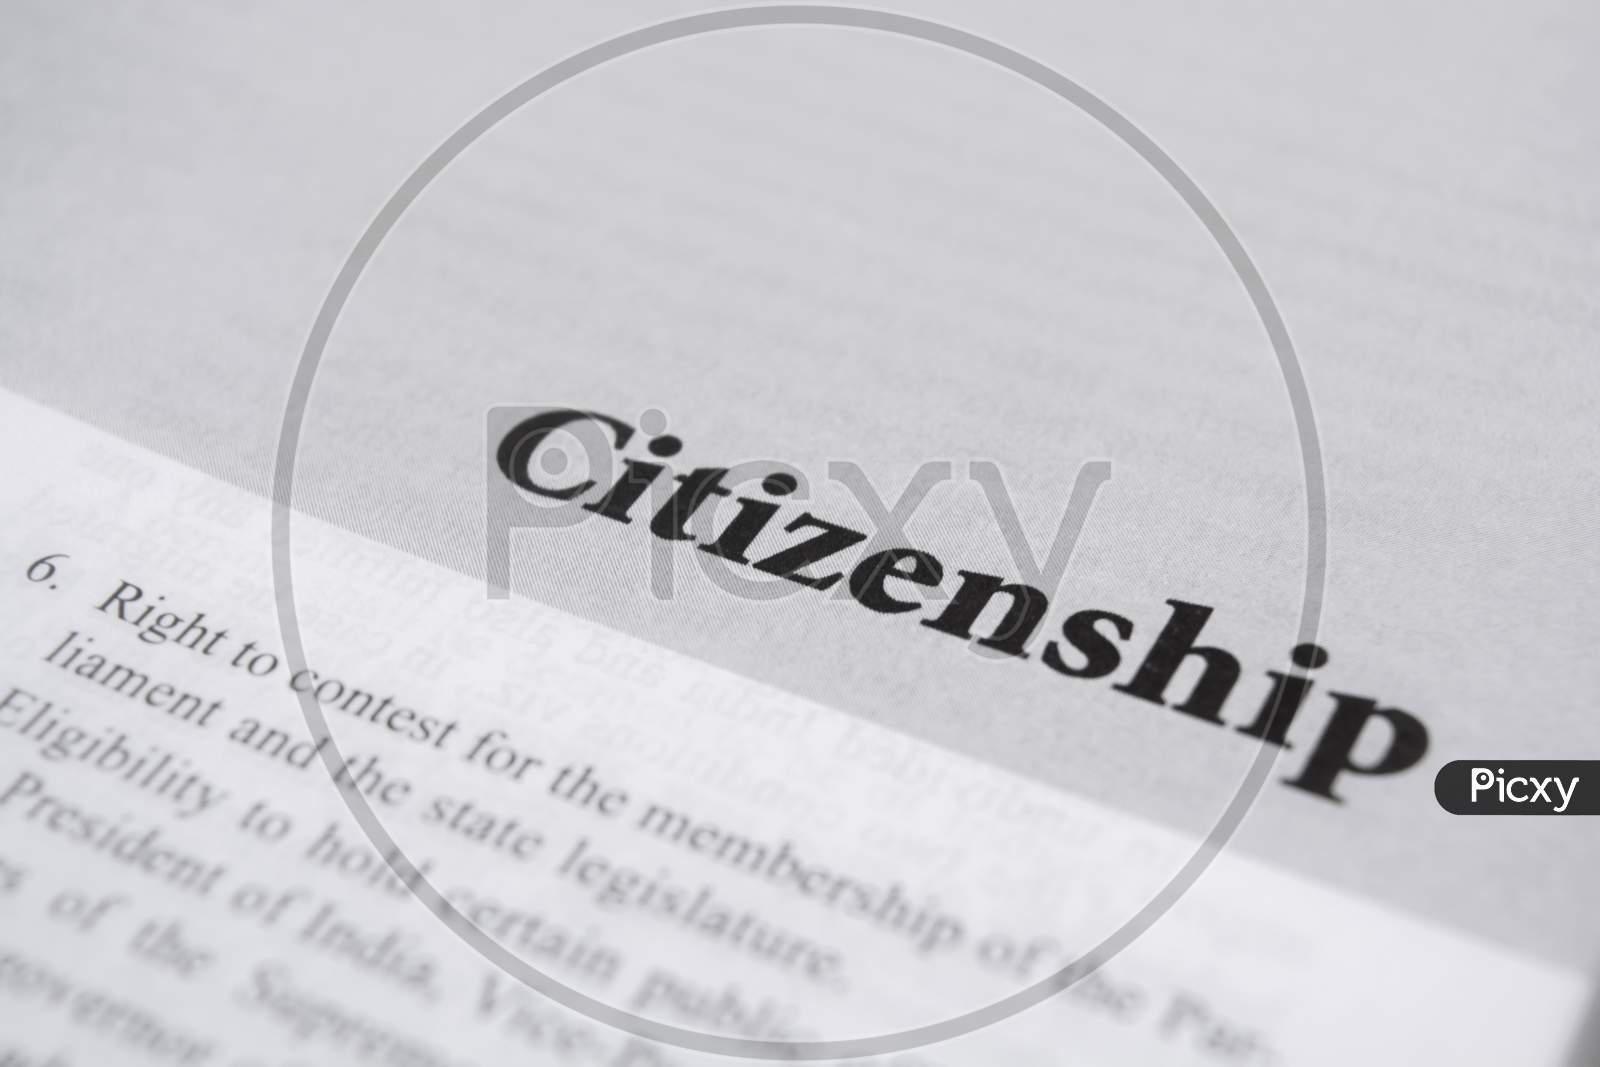 Citizenship Printed On Book With Large Letters.